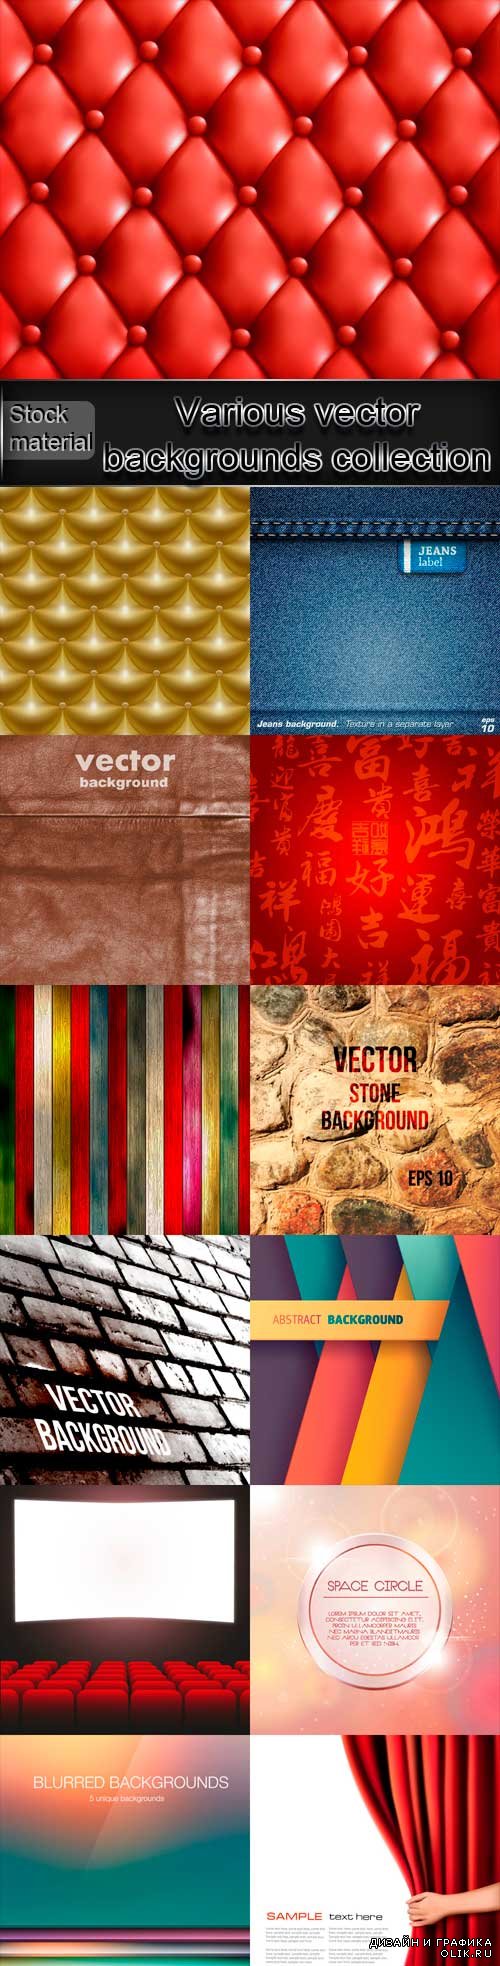 Various vector backgrounds collection